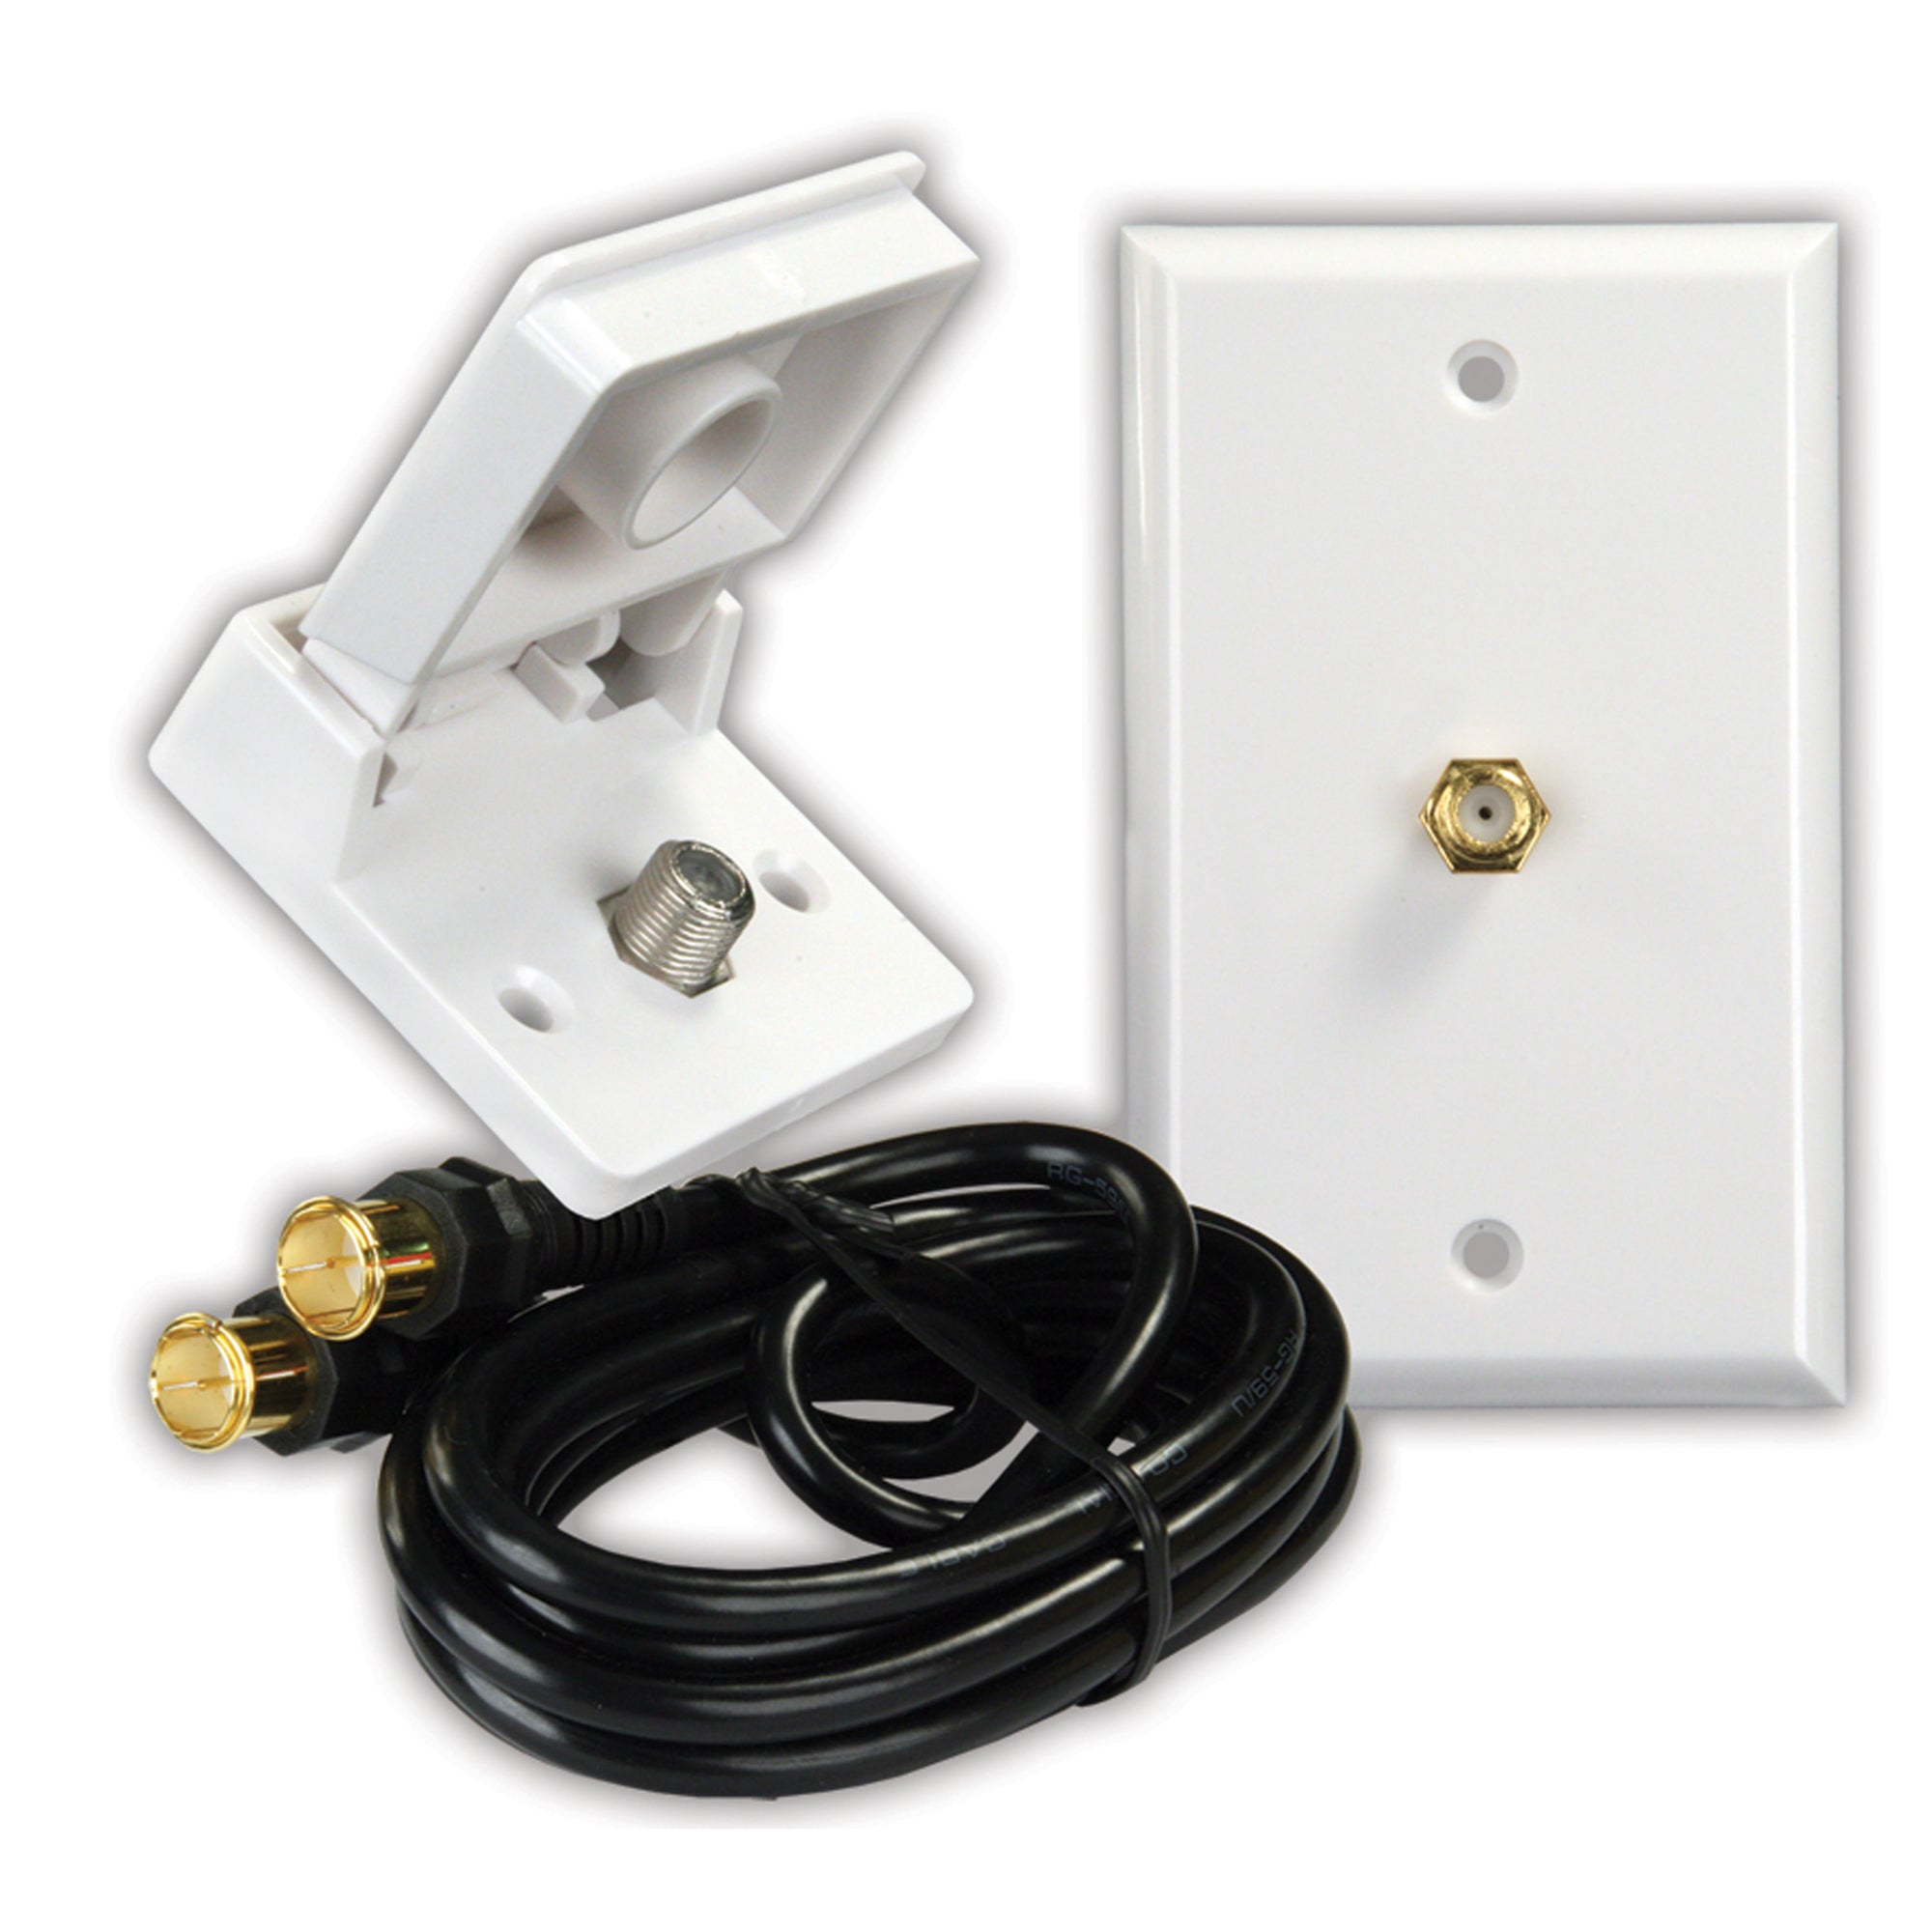 JR Products 47815 Interior/Exterior Cable TV Installation Kit - White